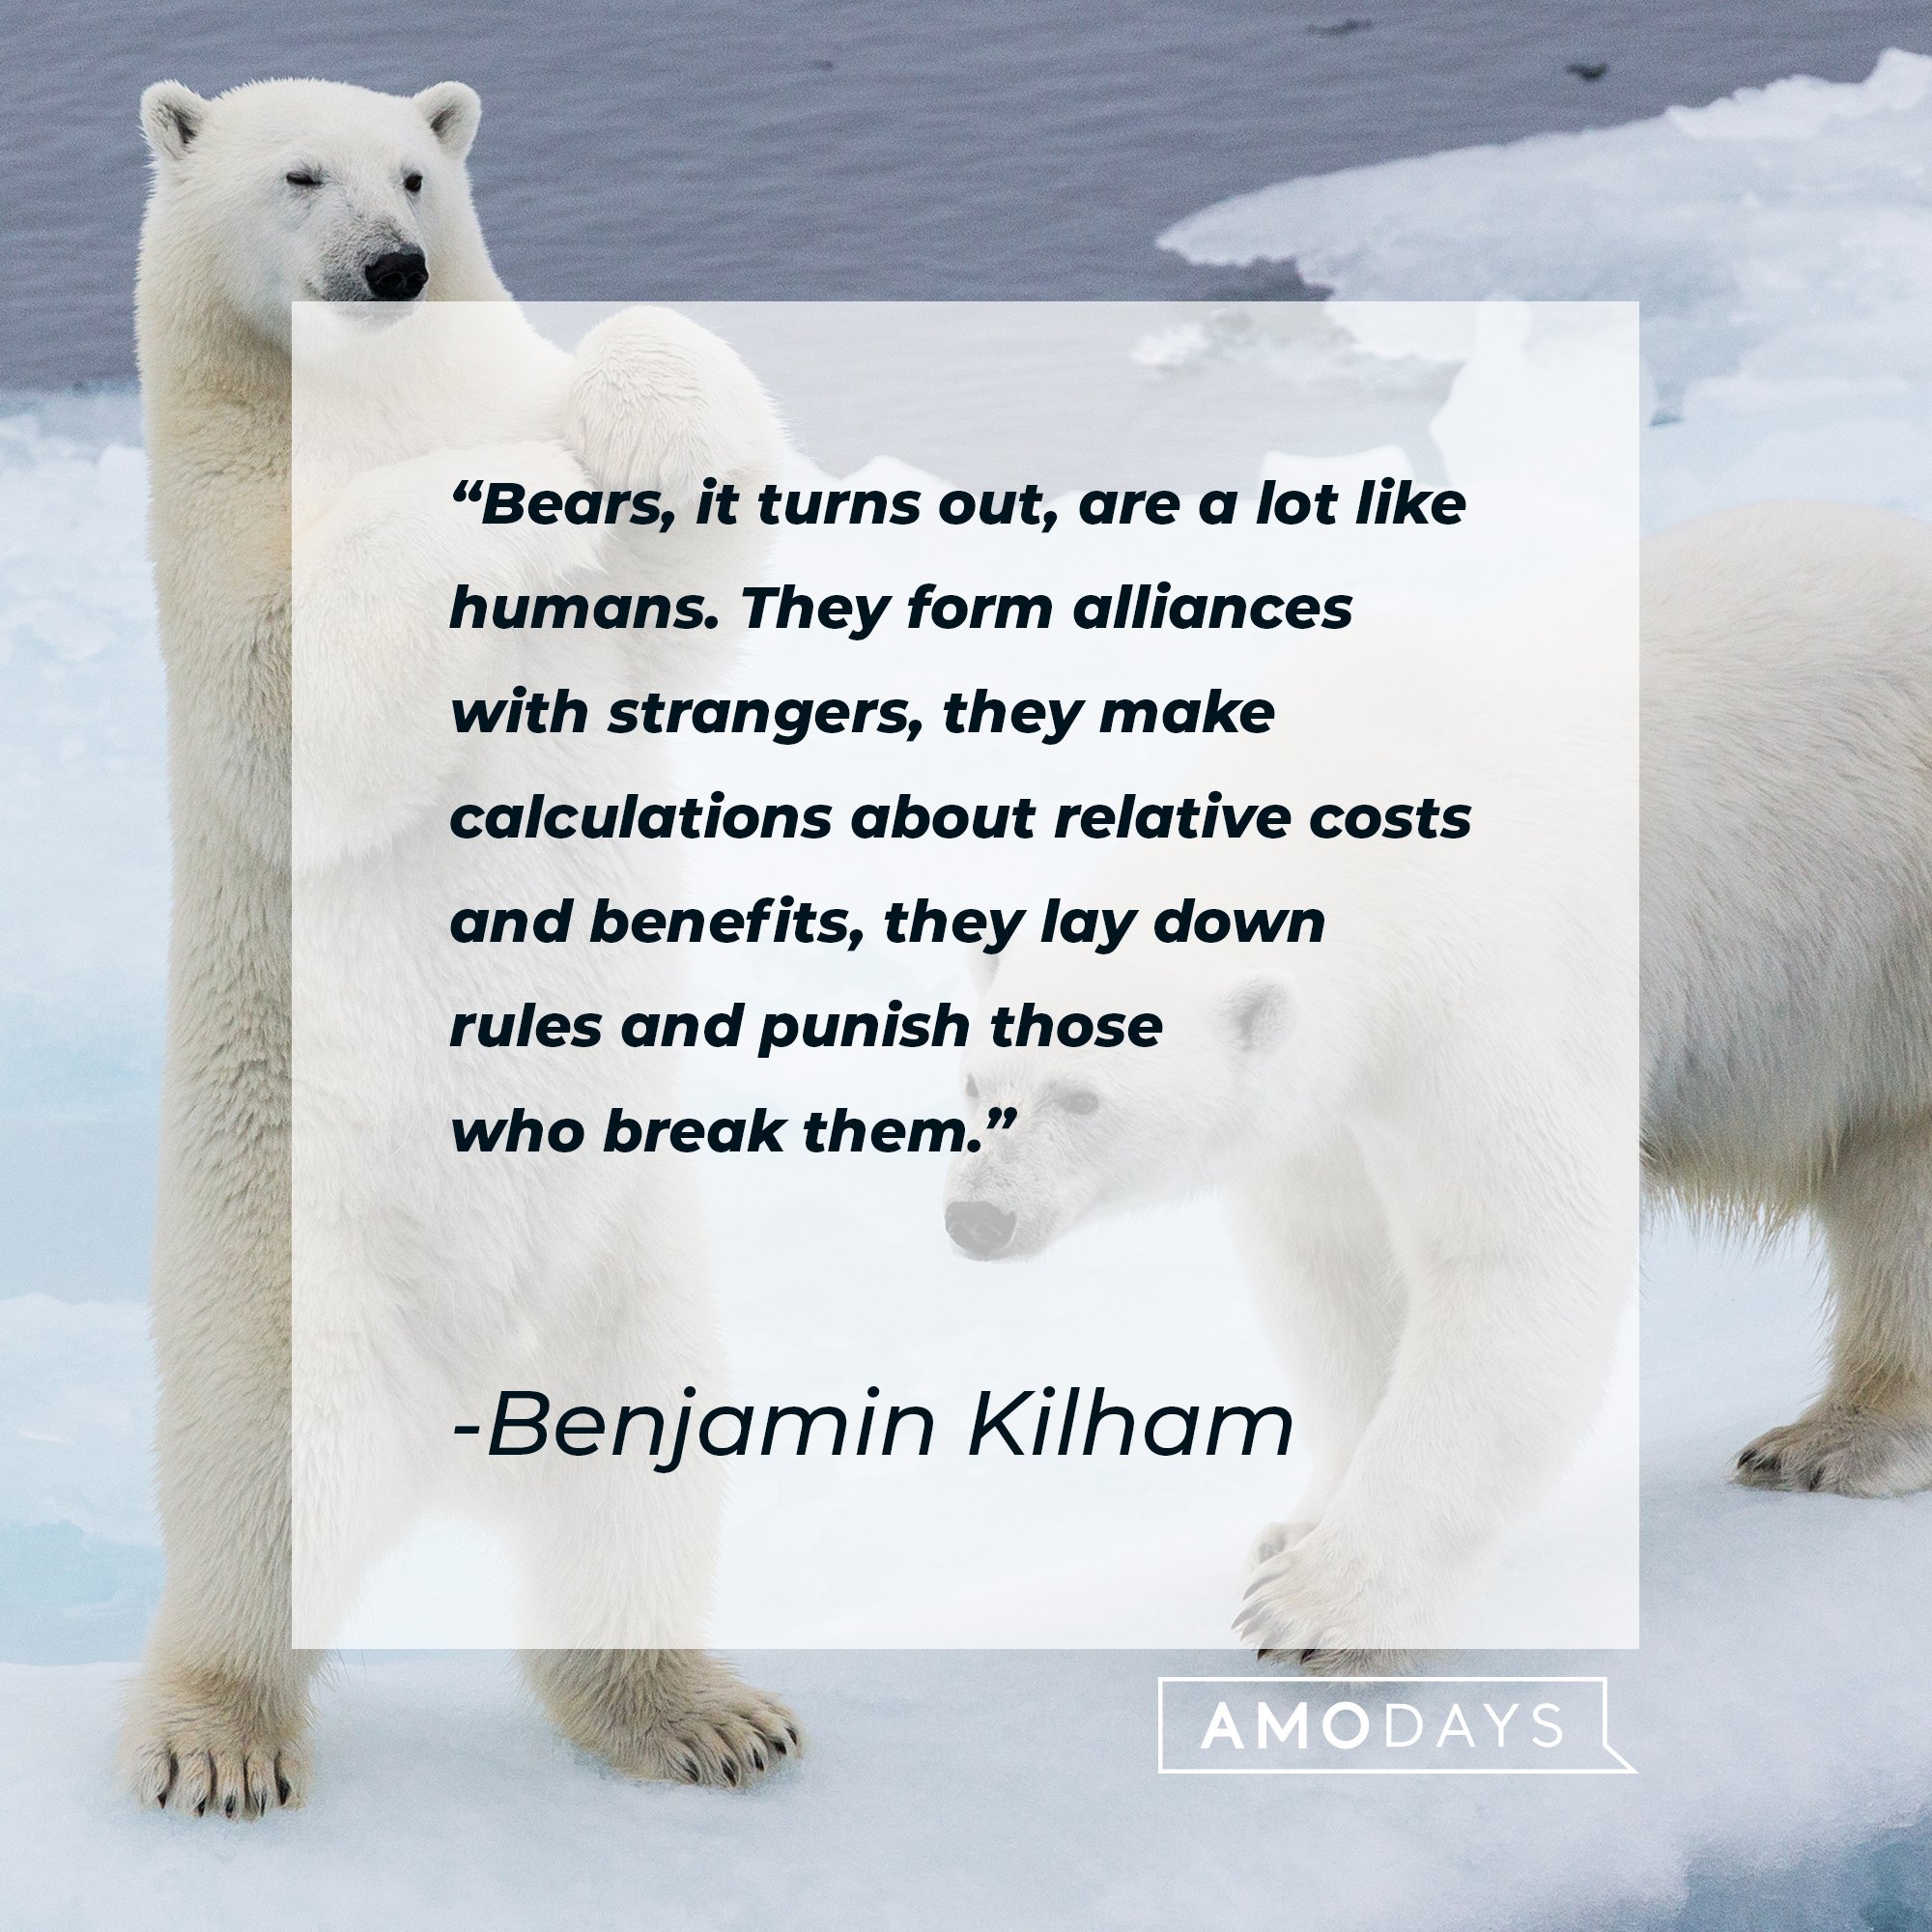 Benjamin Kilham’s quote: “Bears, it turns out, are a lot like humans. They form alliances with strangers, they make calculations about relative costs and benefits, they lay down rules and punish those who break them." | Image: AmoDays